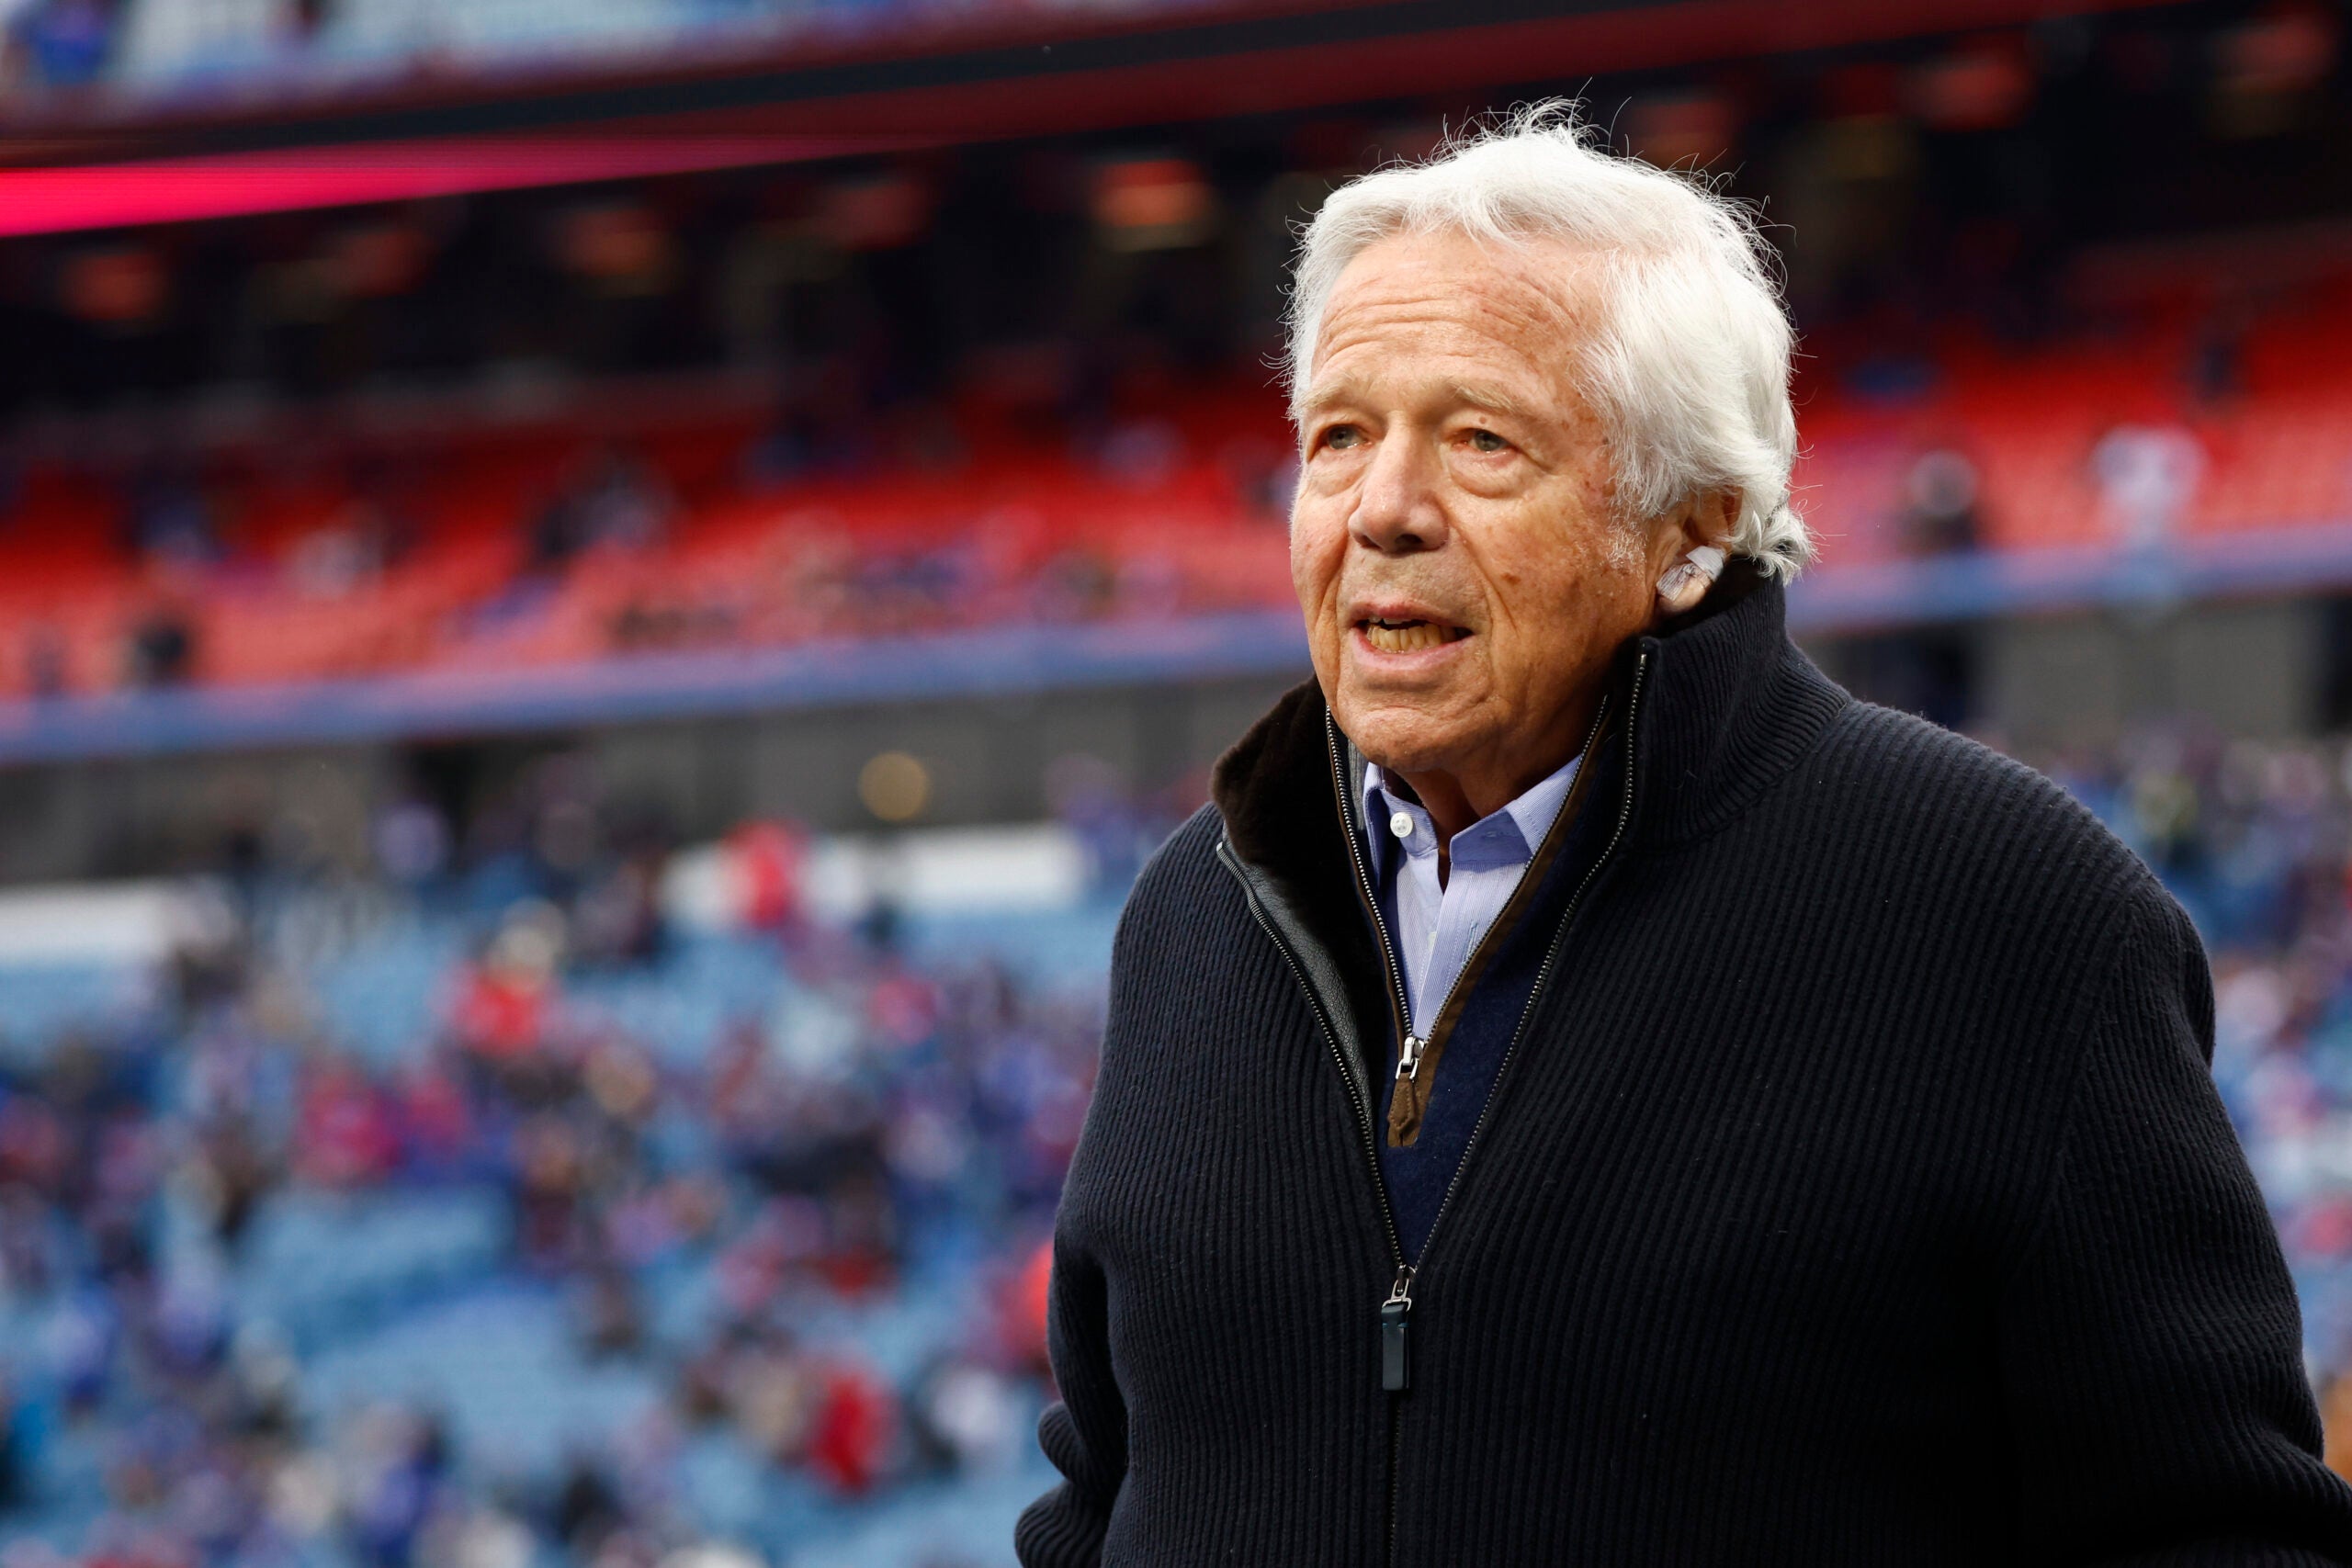 New England Patriots owner Robert Kraft walks the field during practice before an NFL football game against the Buffalo Bills, Sunday, Jan. 8, 2023, in Orchard Park, N.Y